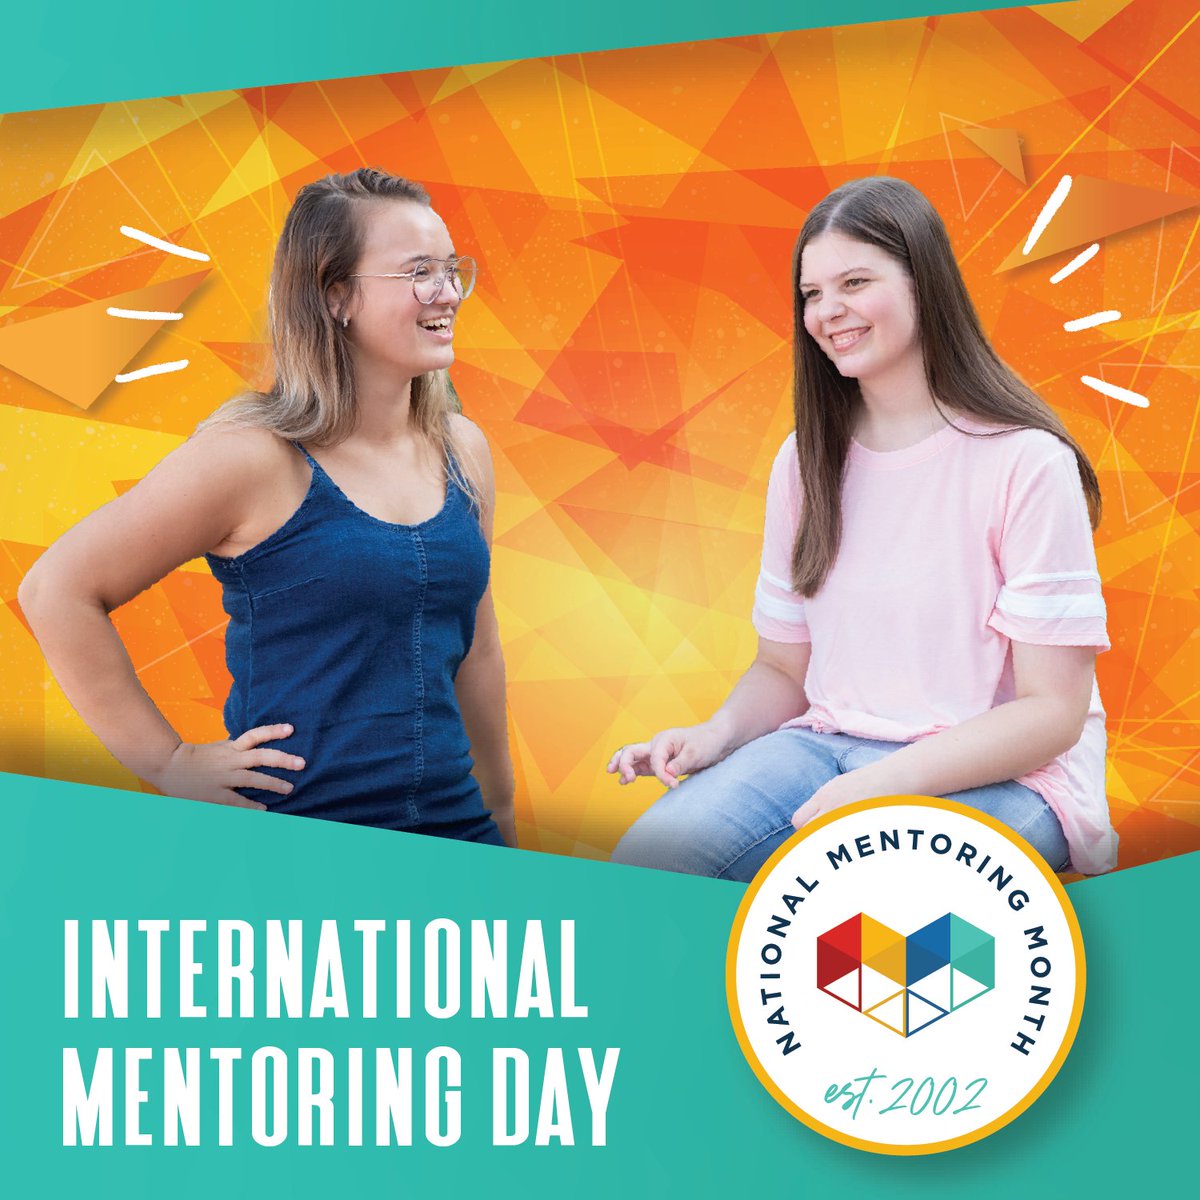 Around the world, #MentoringAmplifies support systems that uplift youth & strengthen communities. Today, on #InternationalMentoringDay, share your mentoring story & let us know why you joined the movement: bit.ly/3m75Duq #MentoringMonth #AliDay @AliCenter @MentoringDay